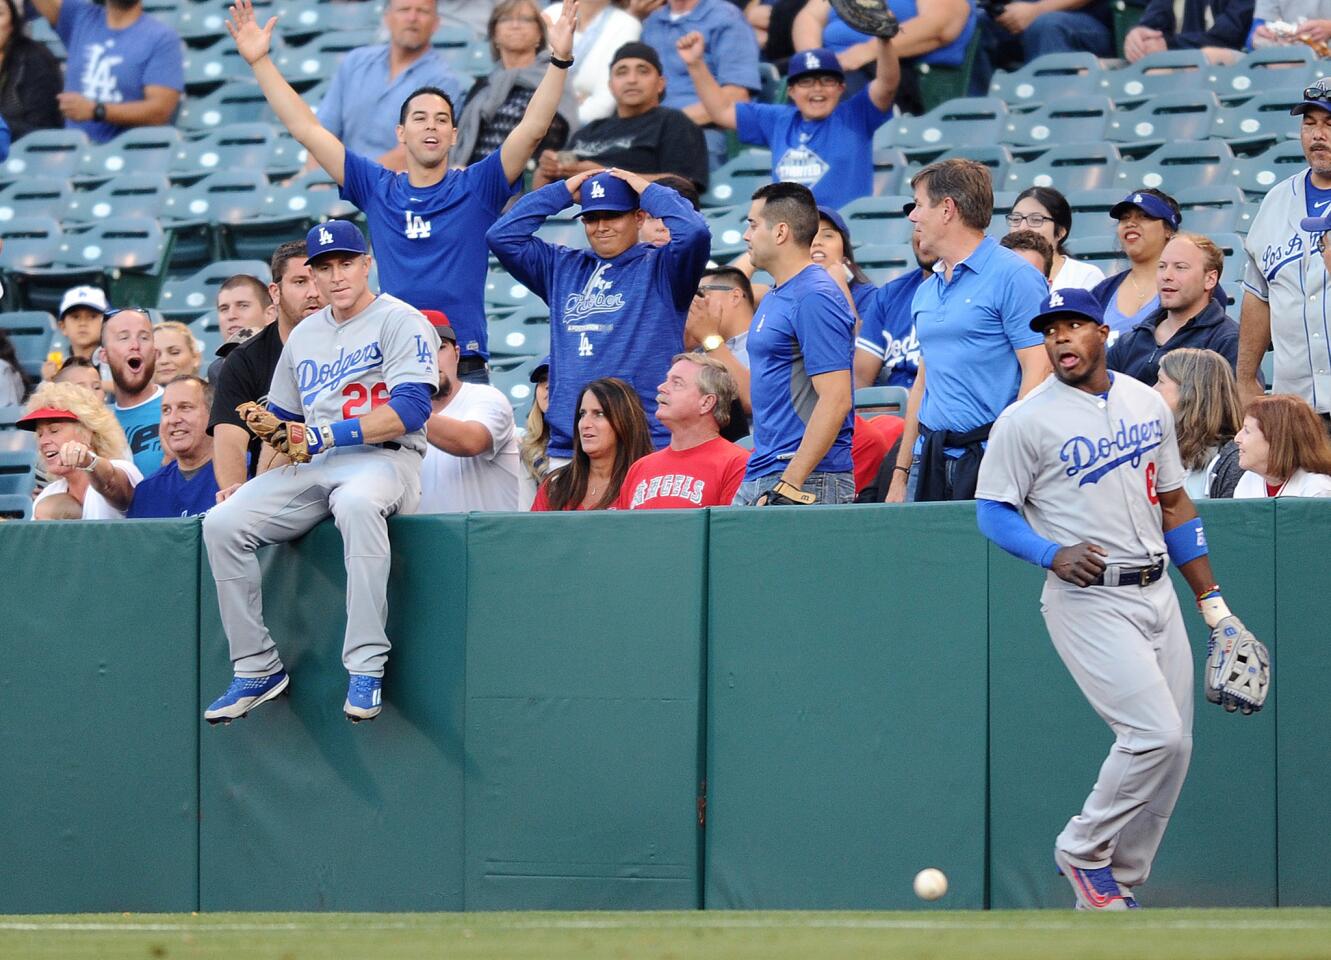 Dodgers second baseman Chase Utley takes a seat on the wall after he and right fielder Yasiel Puig couldn't track down a foul ball hit by the Angels' Yunel Escobar in the first inning.